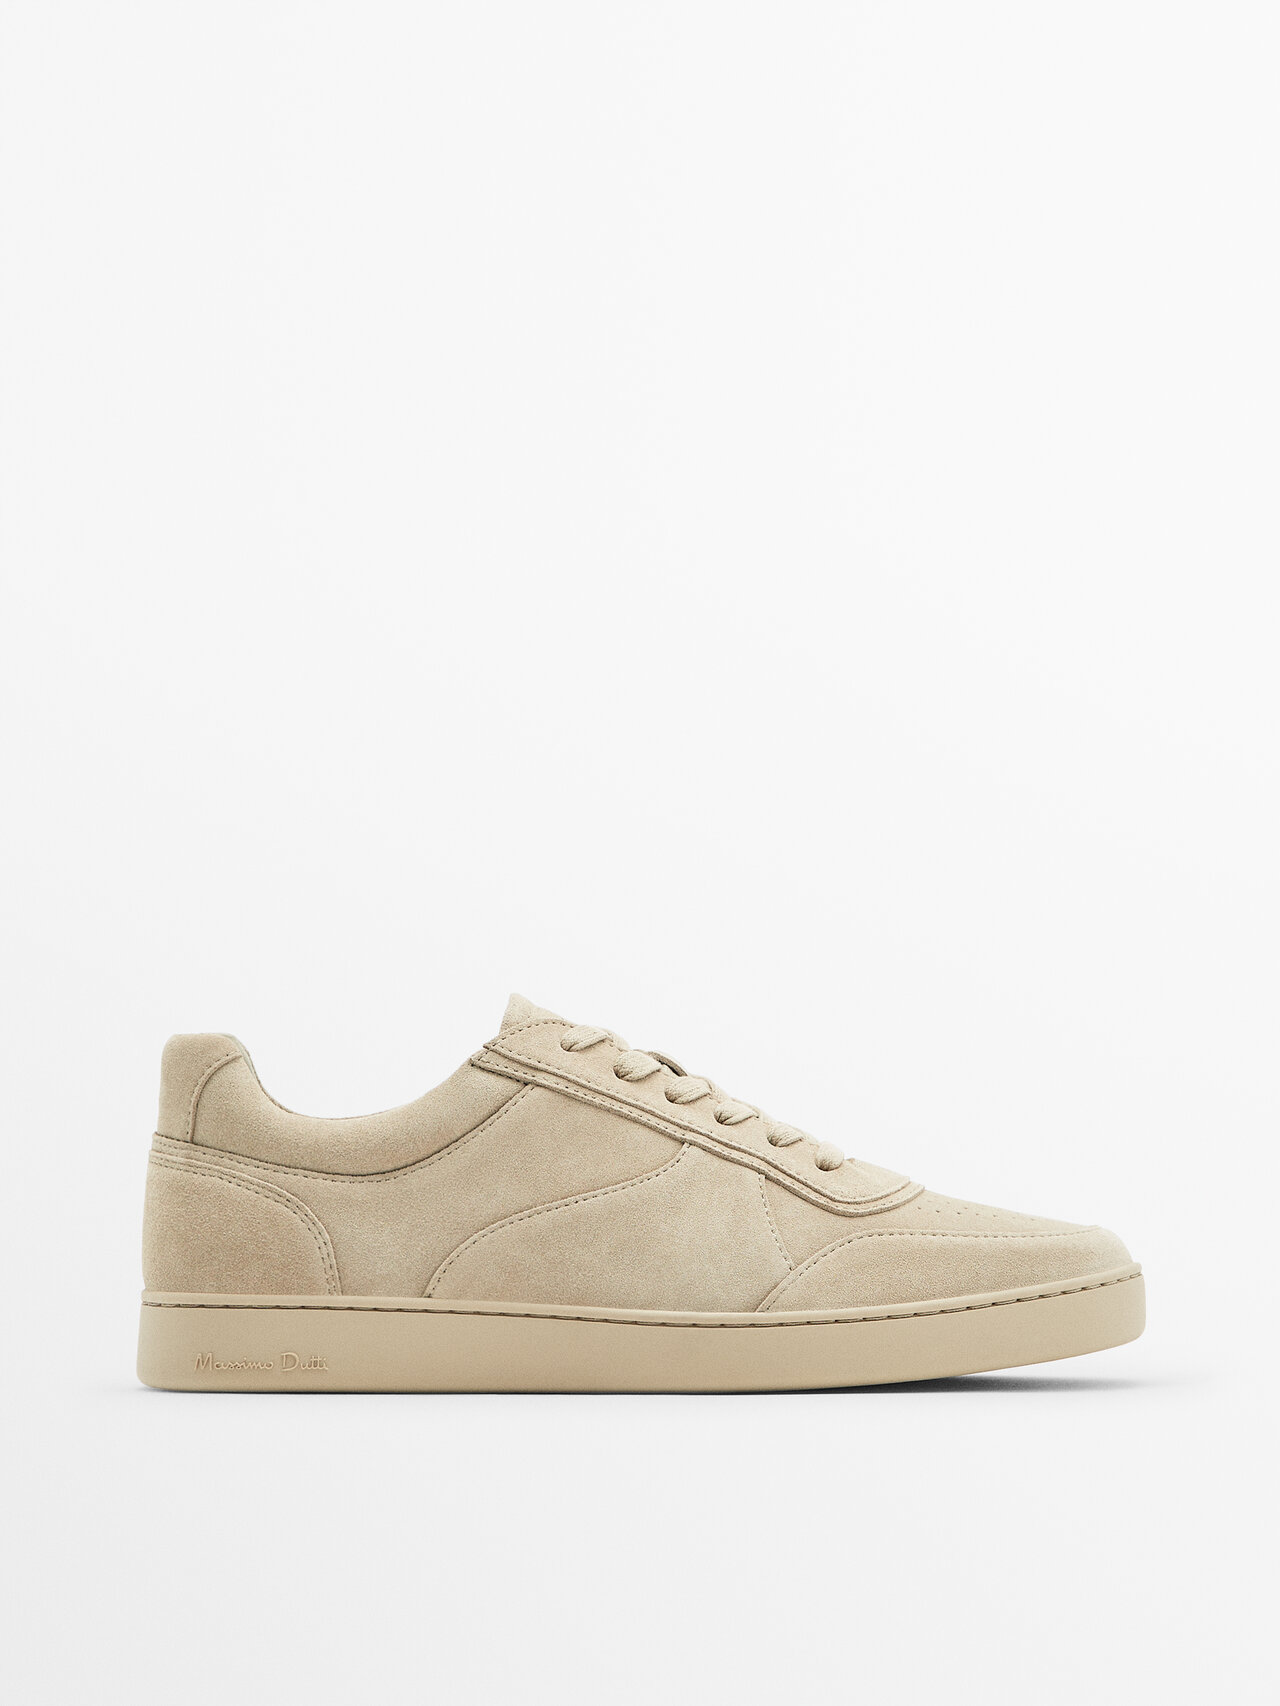 Massimo Dutti Split Suede Leather Trainers In Sand